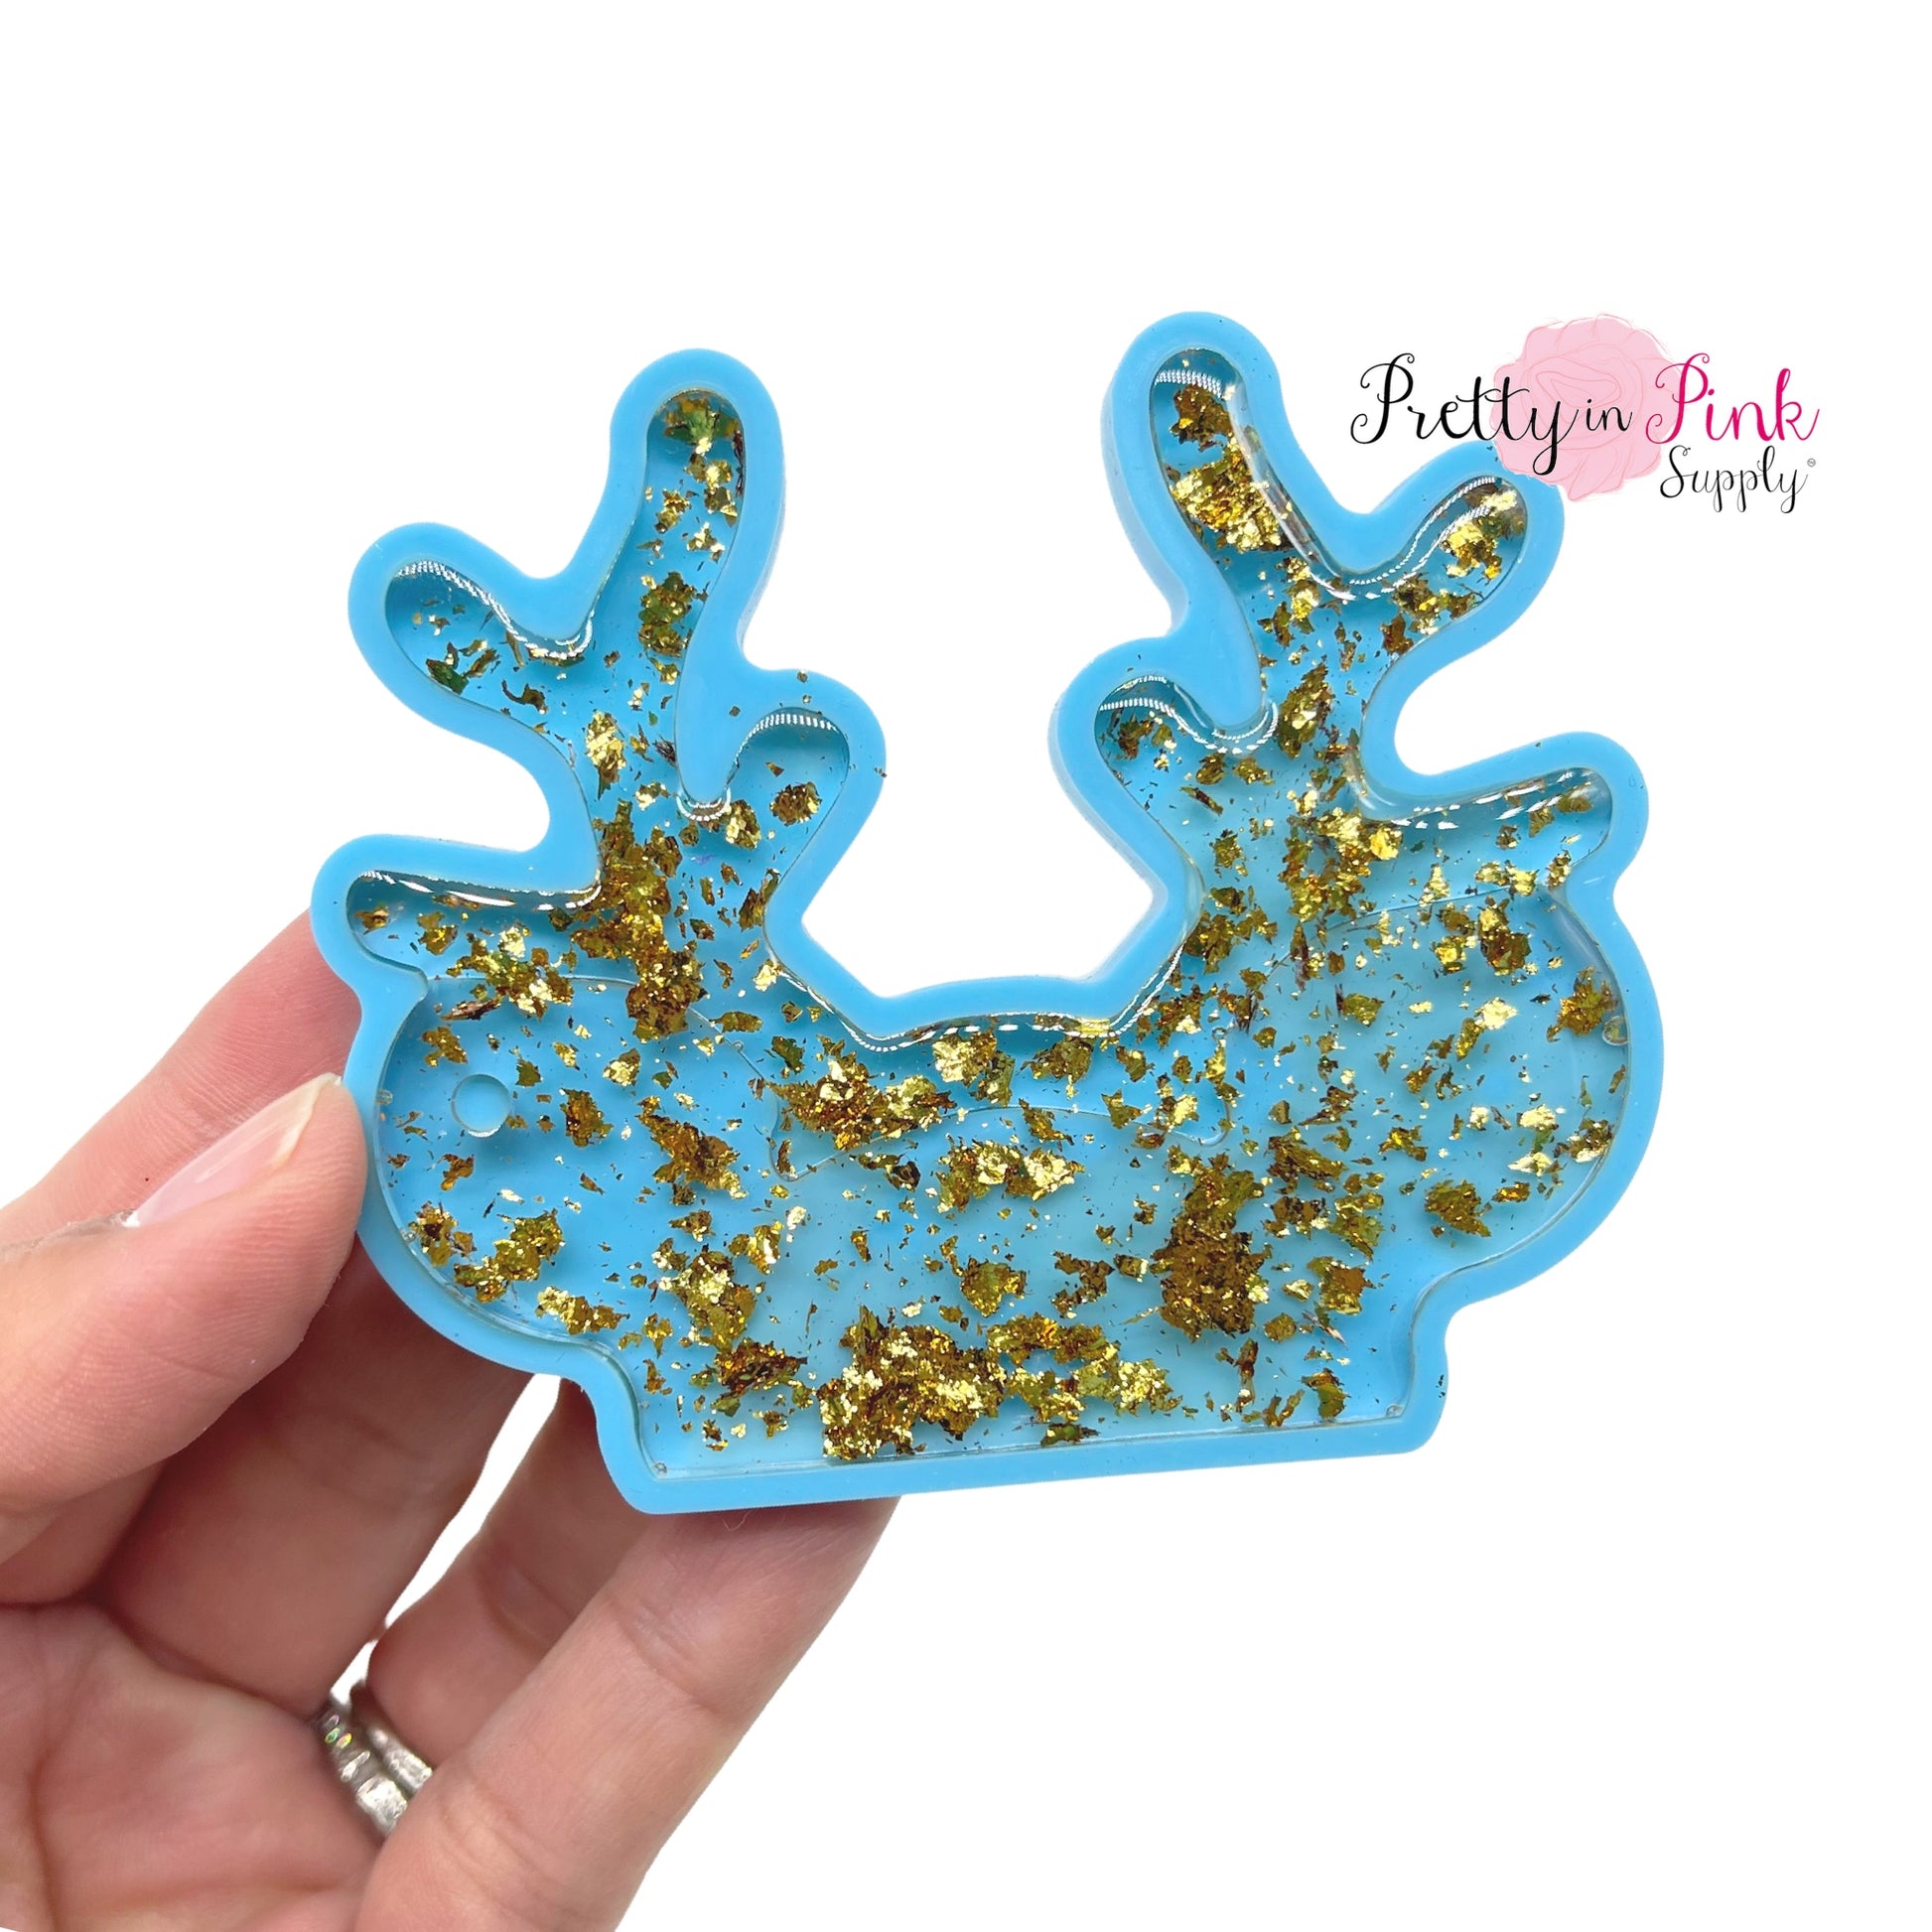 Blue Silicone antler mouse ear keychain shown filled with glitter resin.